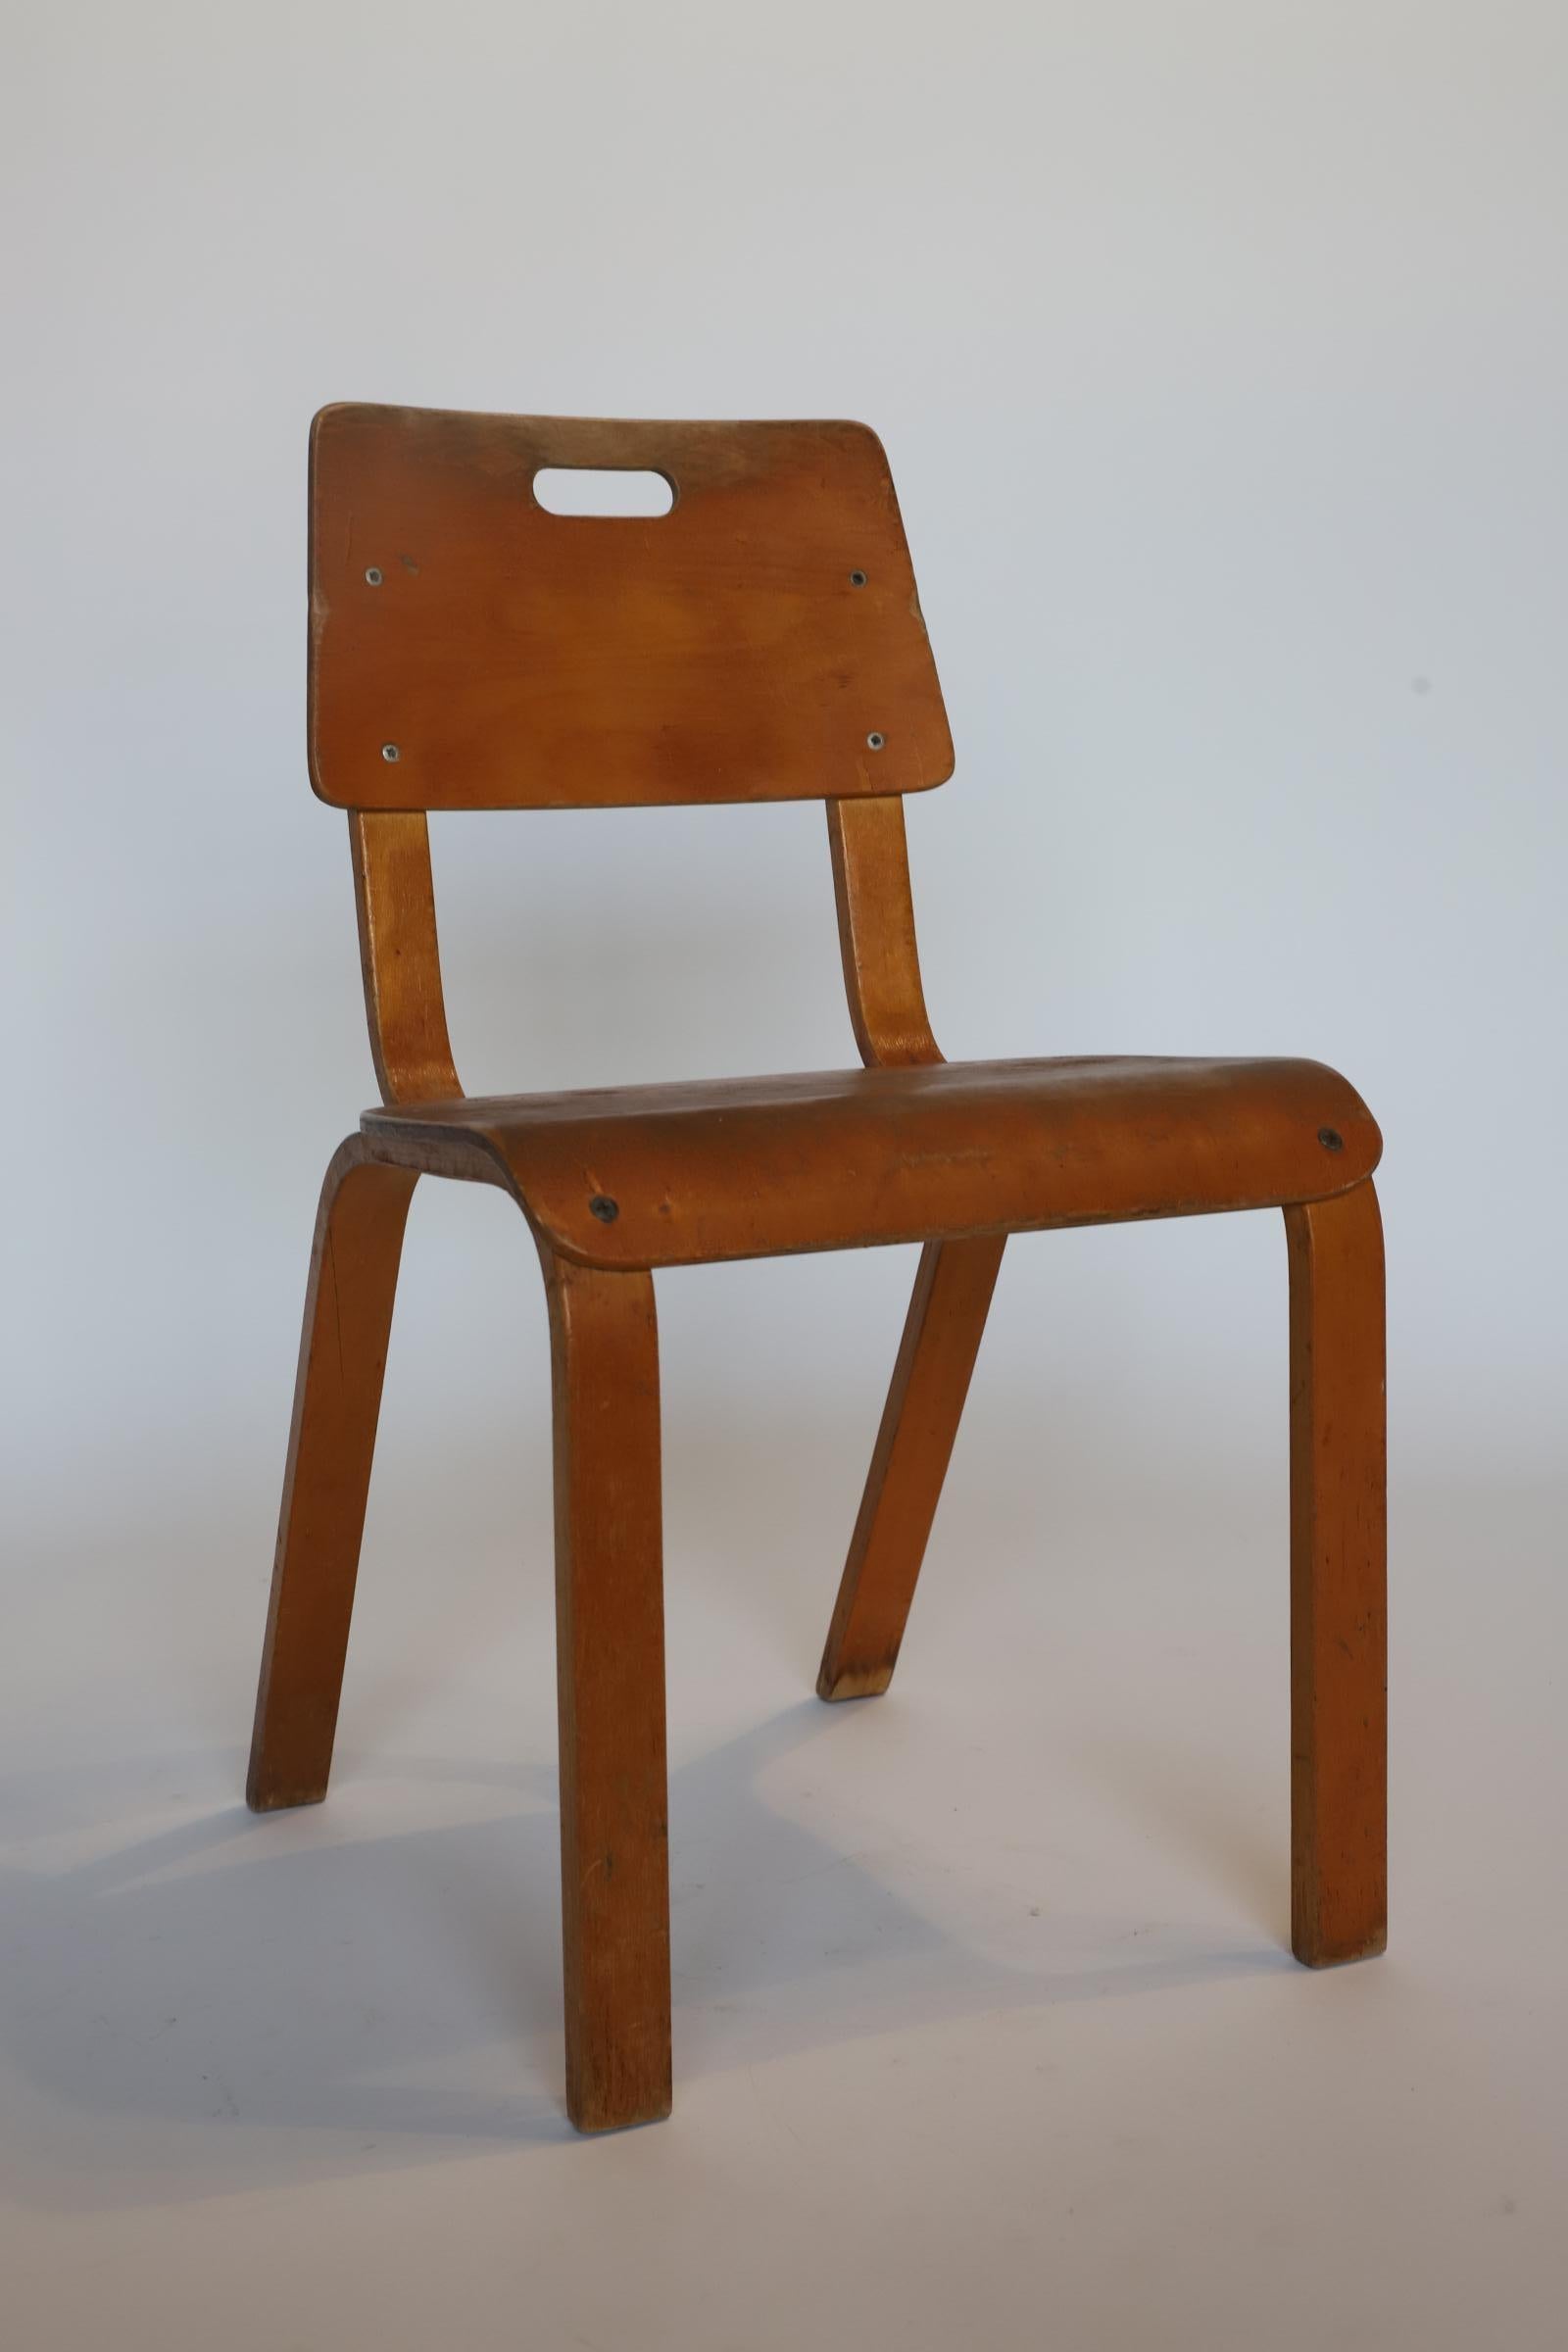 Fun bentwood child’s chair by Thonet. This piece has a great patina from many years of use. Photographed with Bertoia side chair by Knoll for scale.